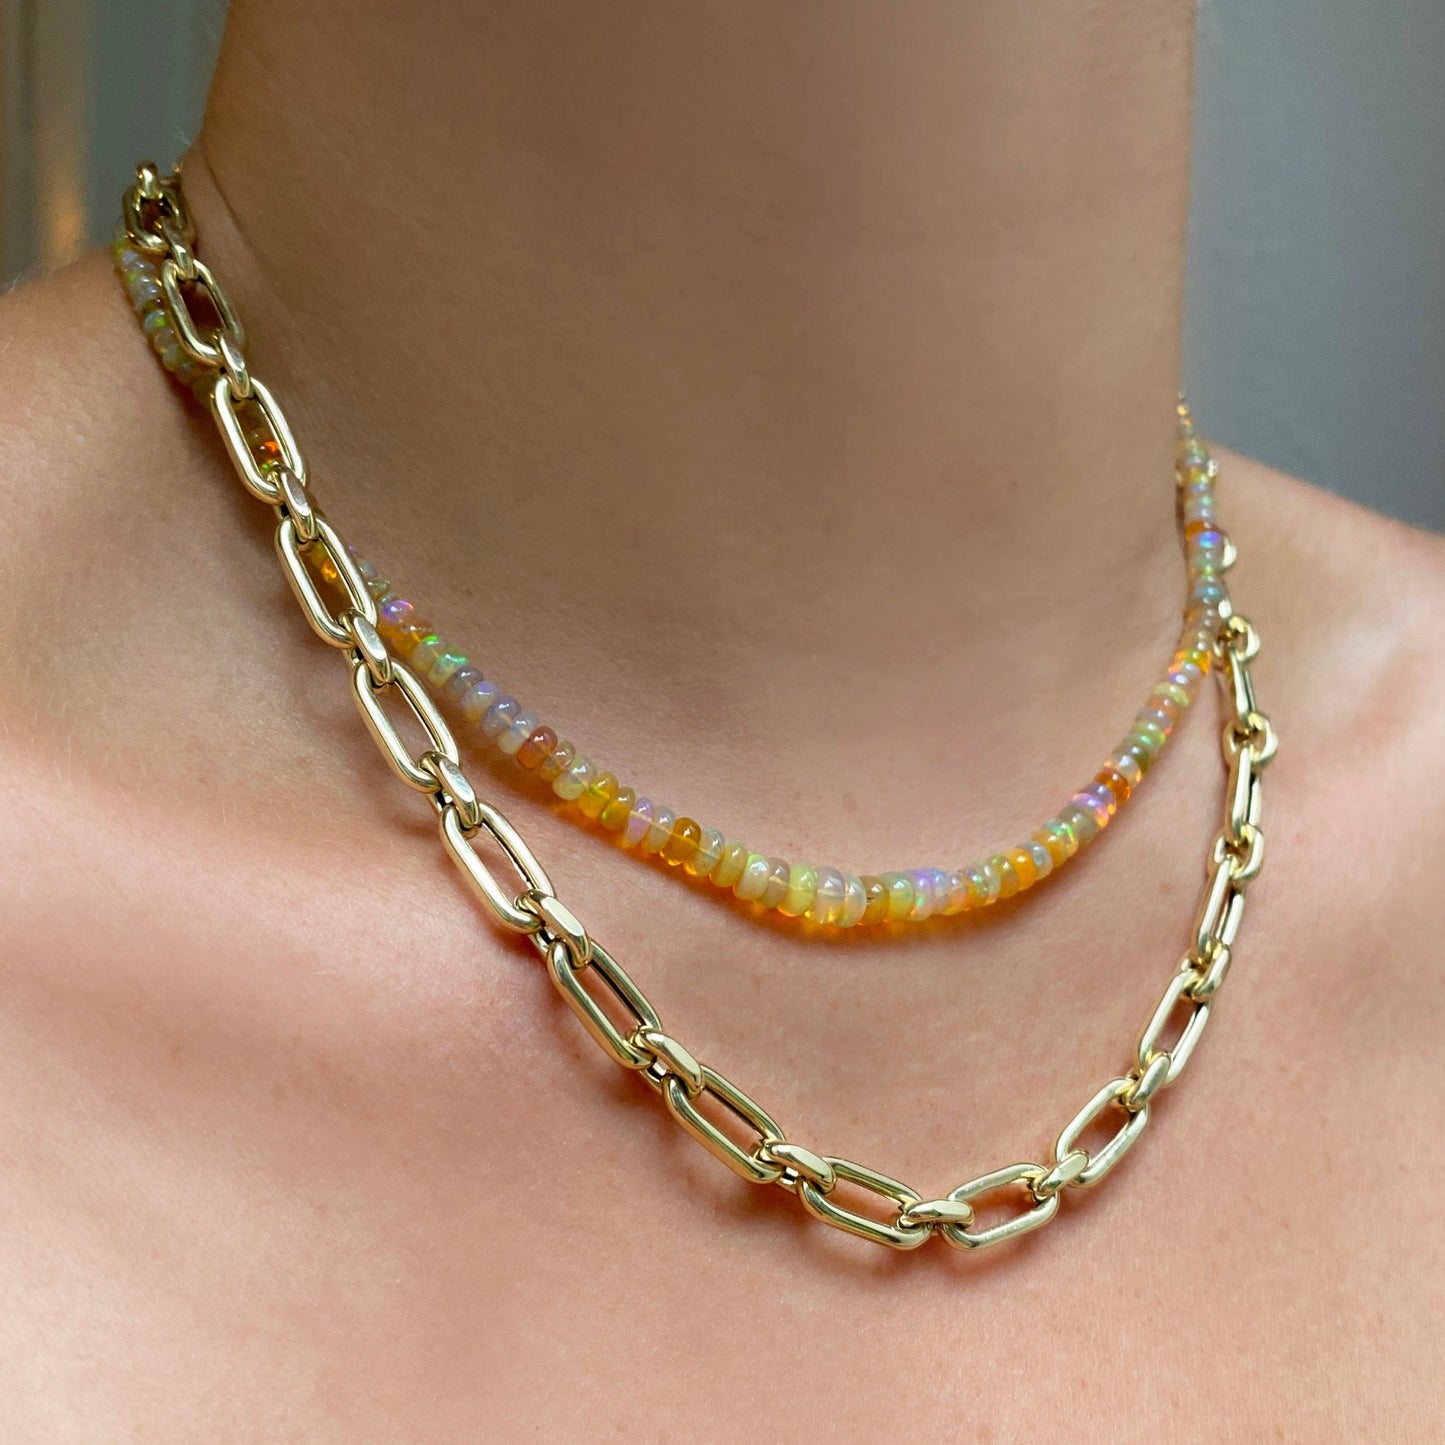 Shimmering beaded necklace made of faceted opals in shades of yellow, orange, and clear opals on a gold linking ovals clasp. Styled on a neck layered with the diamond cut link chain necklace.